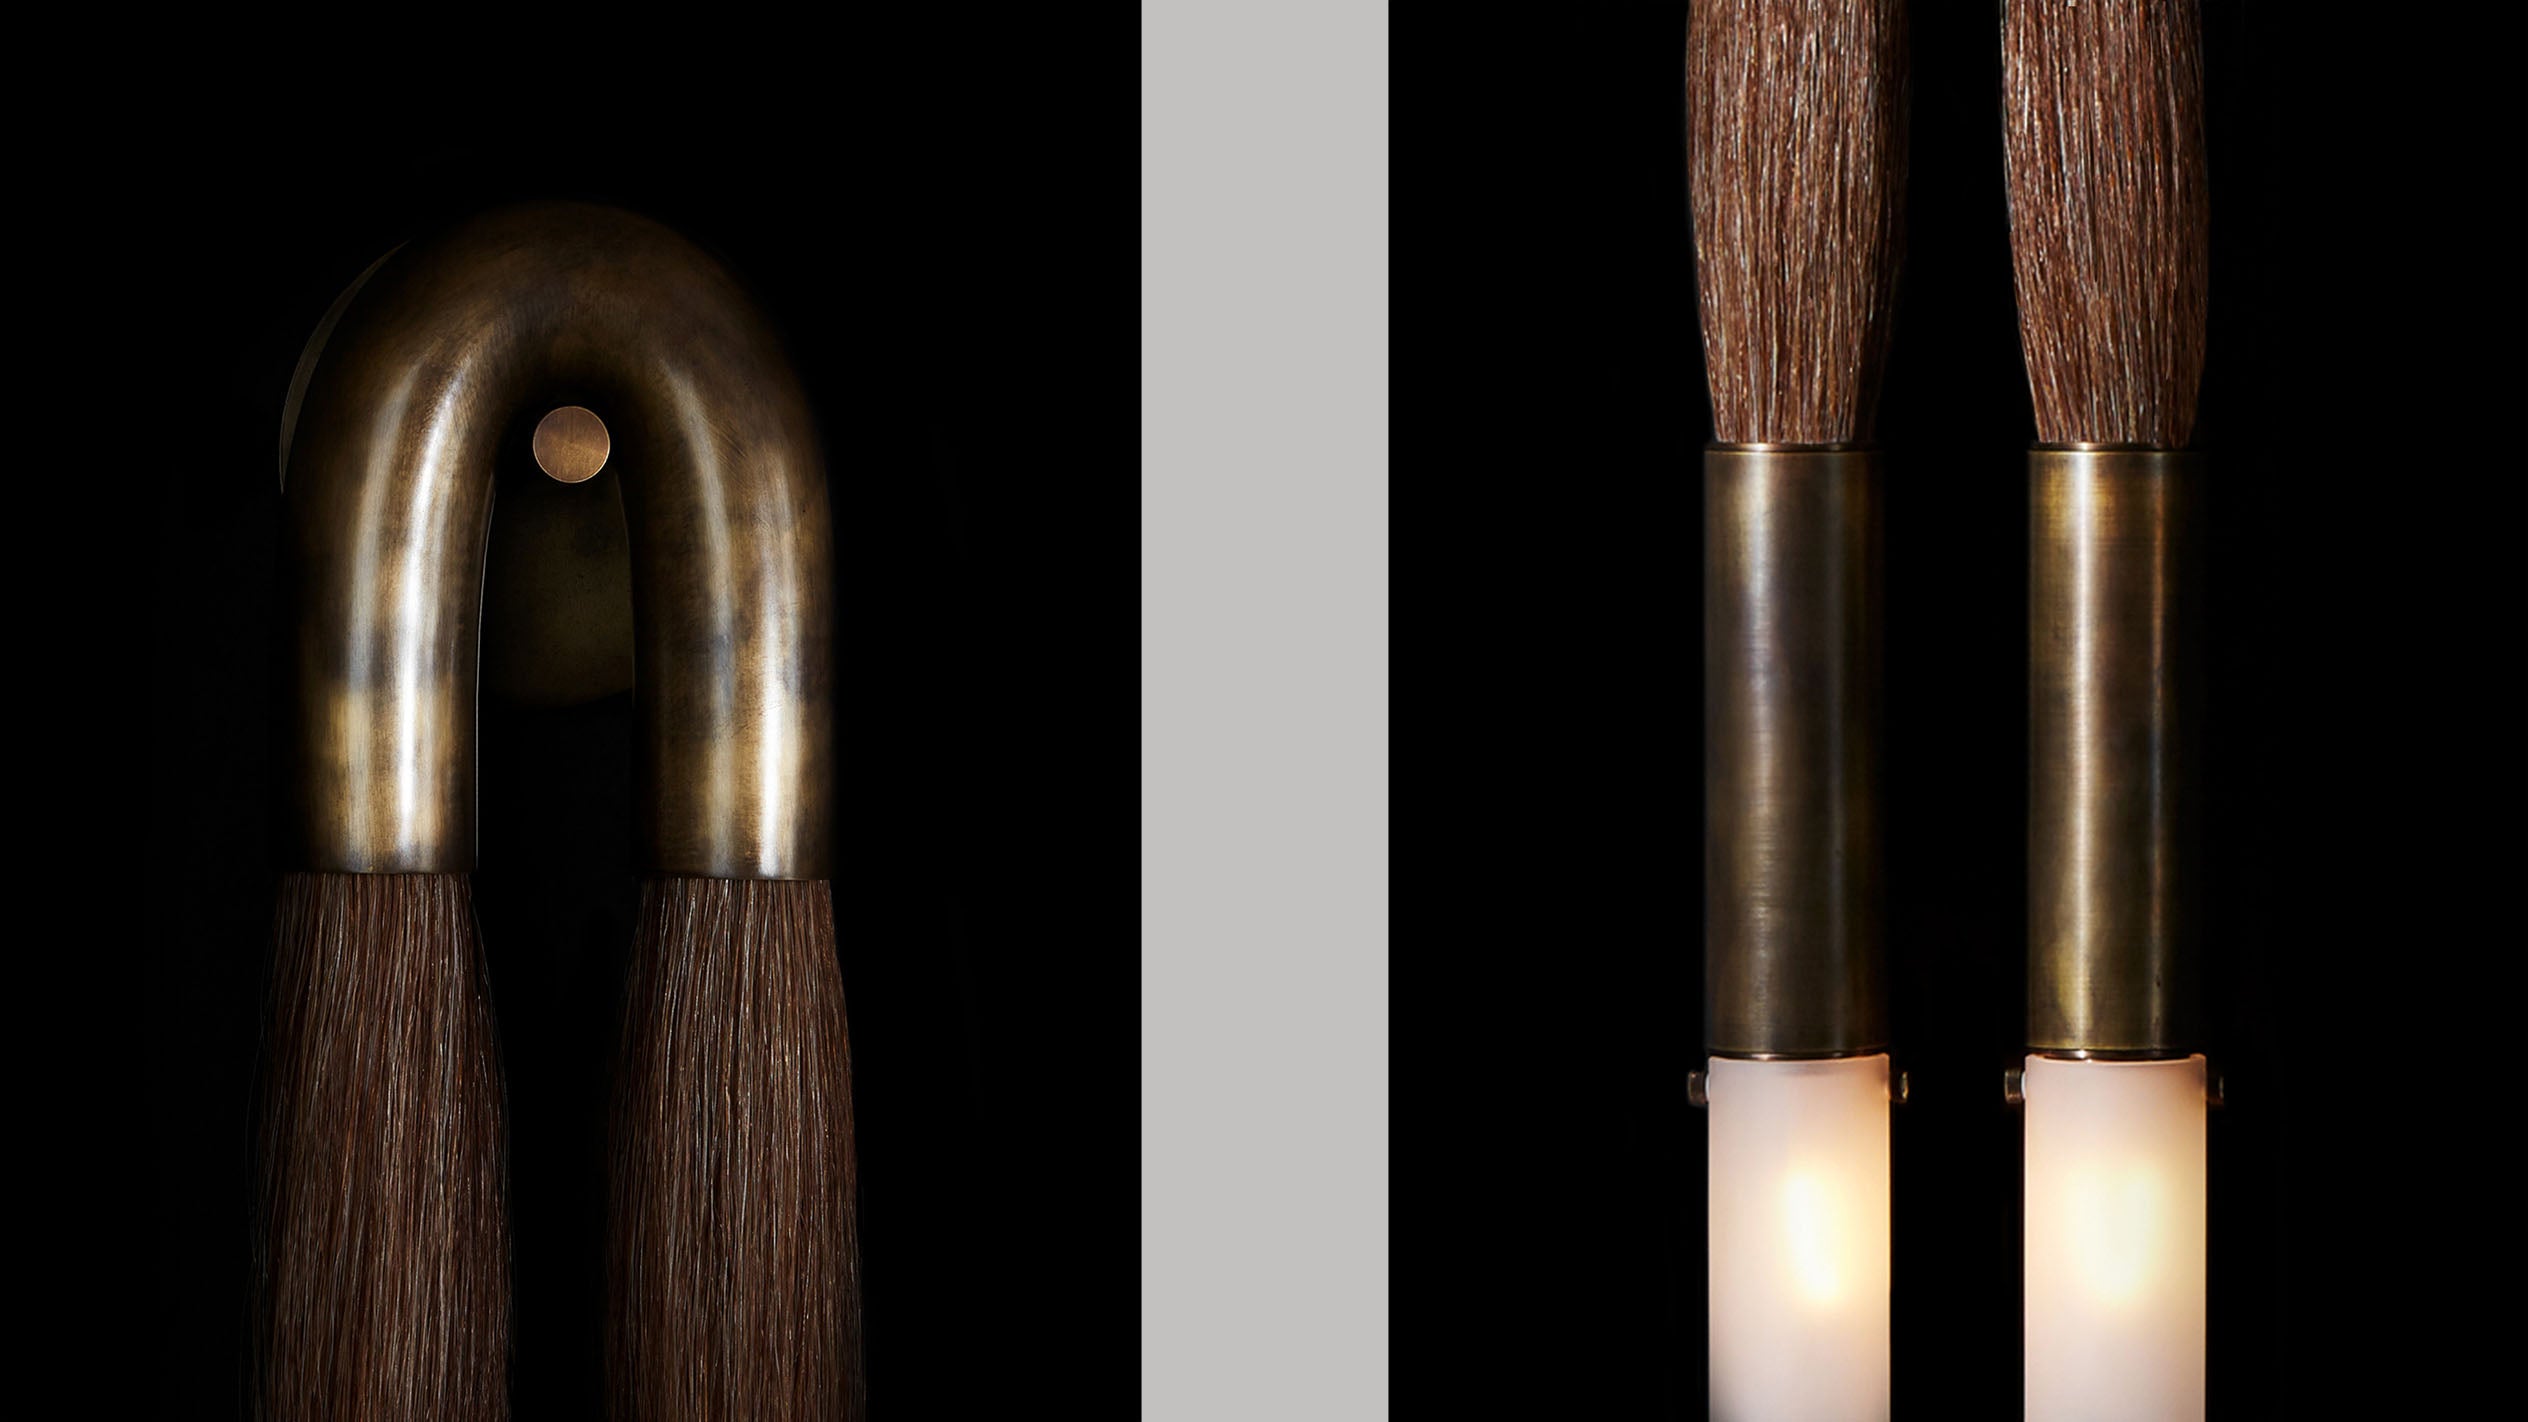 Close ups of an illuminated HORSEHAIR sconce showing details of the Oil-Rubbed Bronze finish and Flaxen Horsehair. 